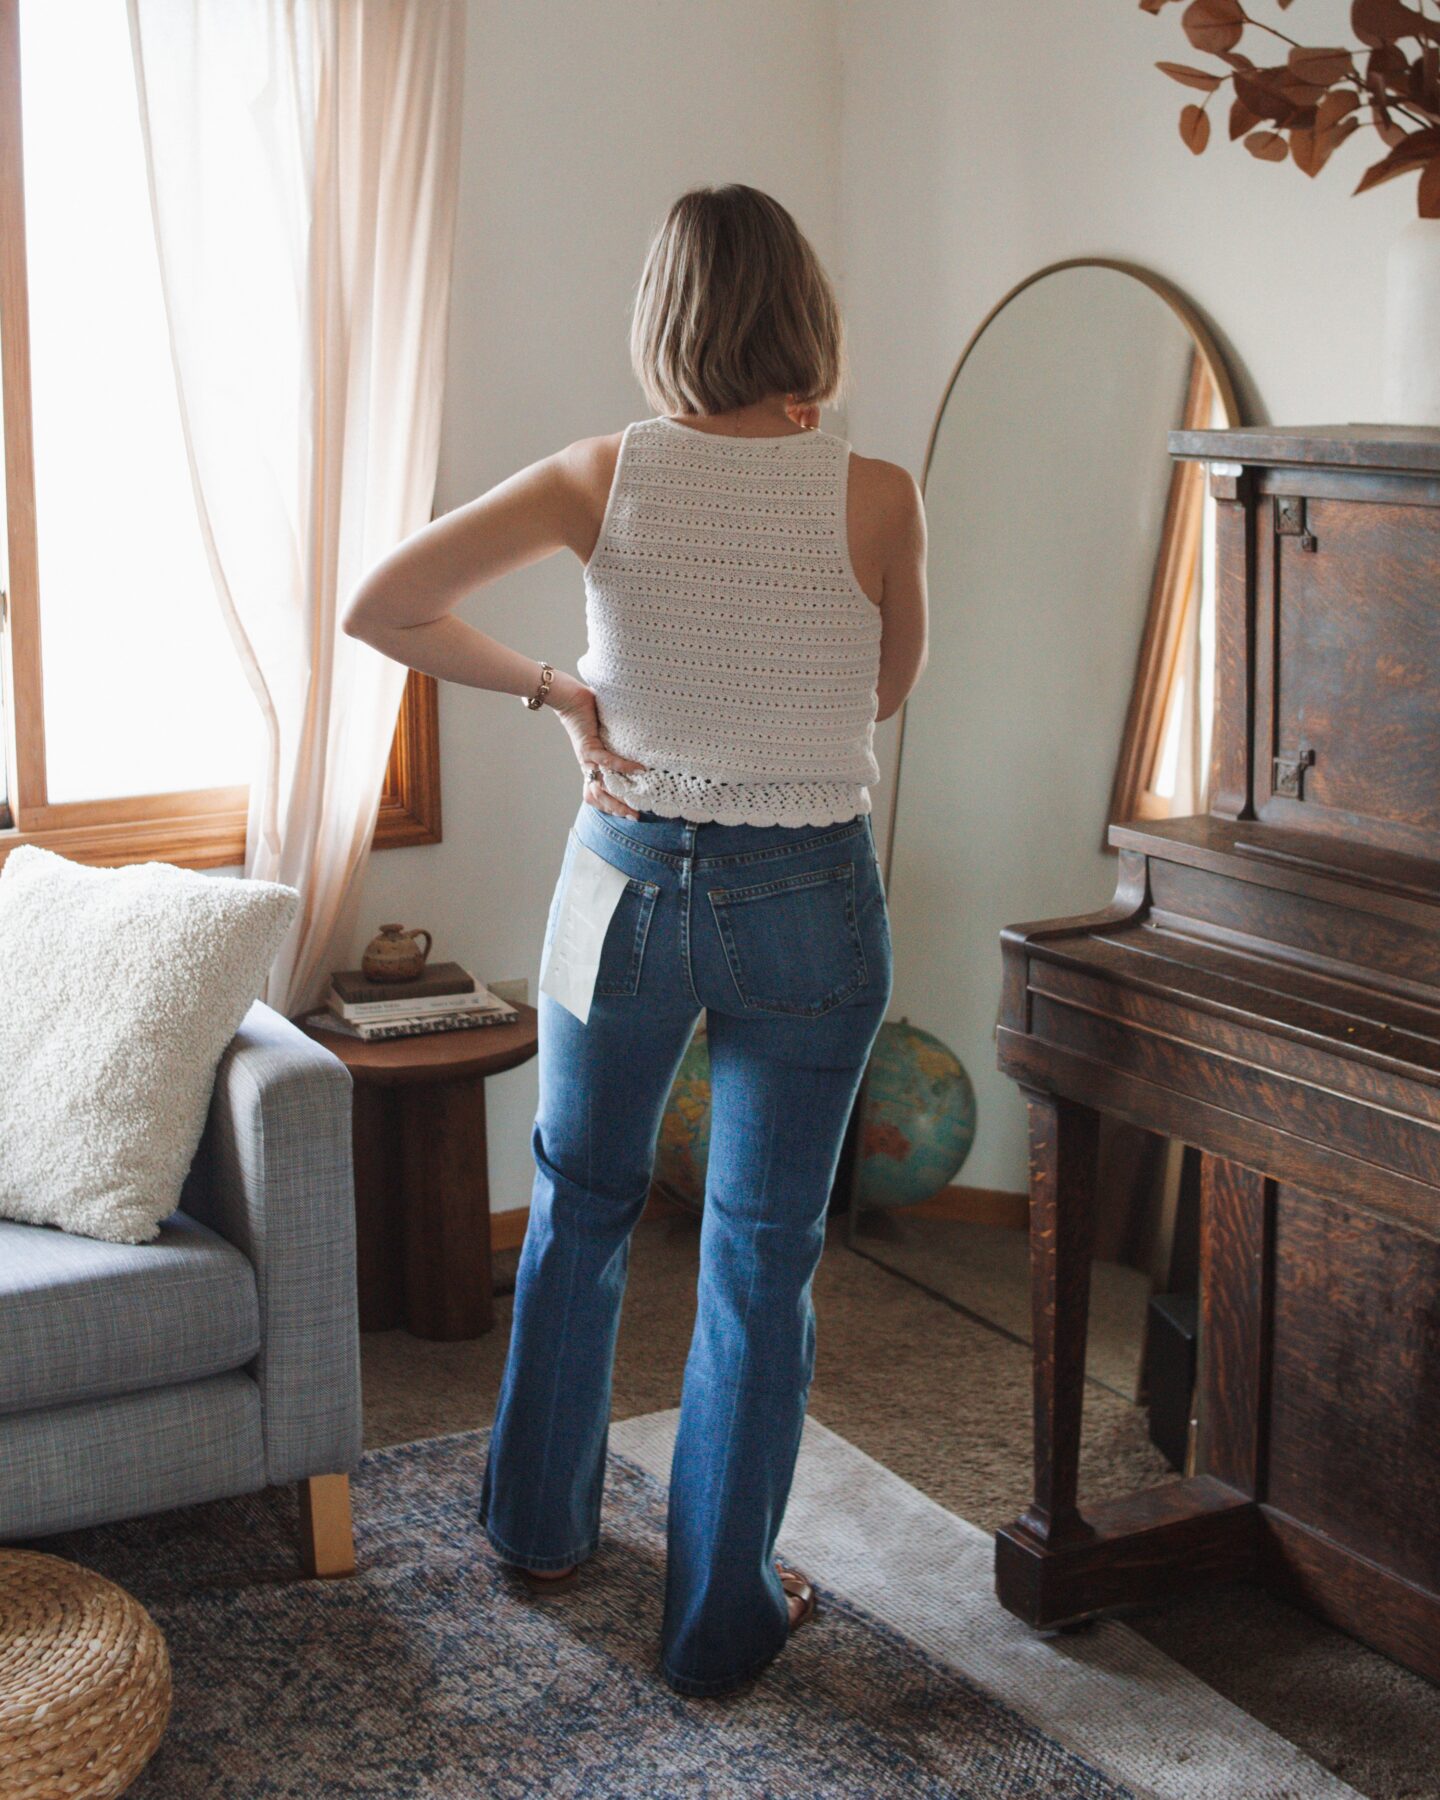 Karin Emily wears the new Everlane flare denim while standing in her living room